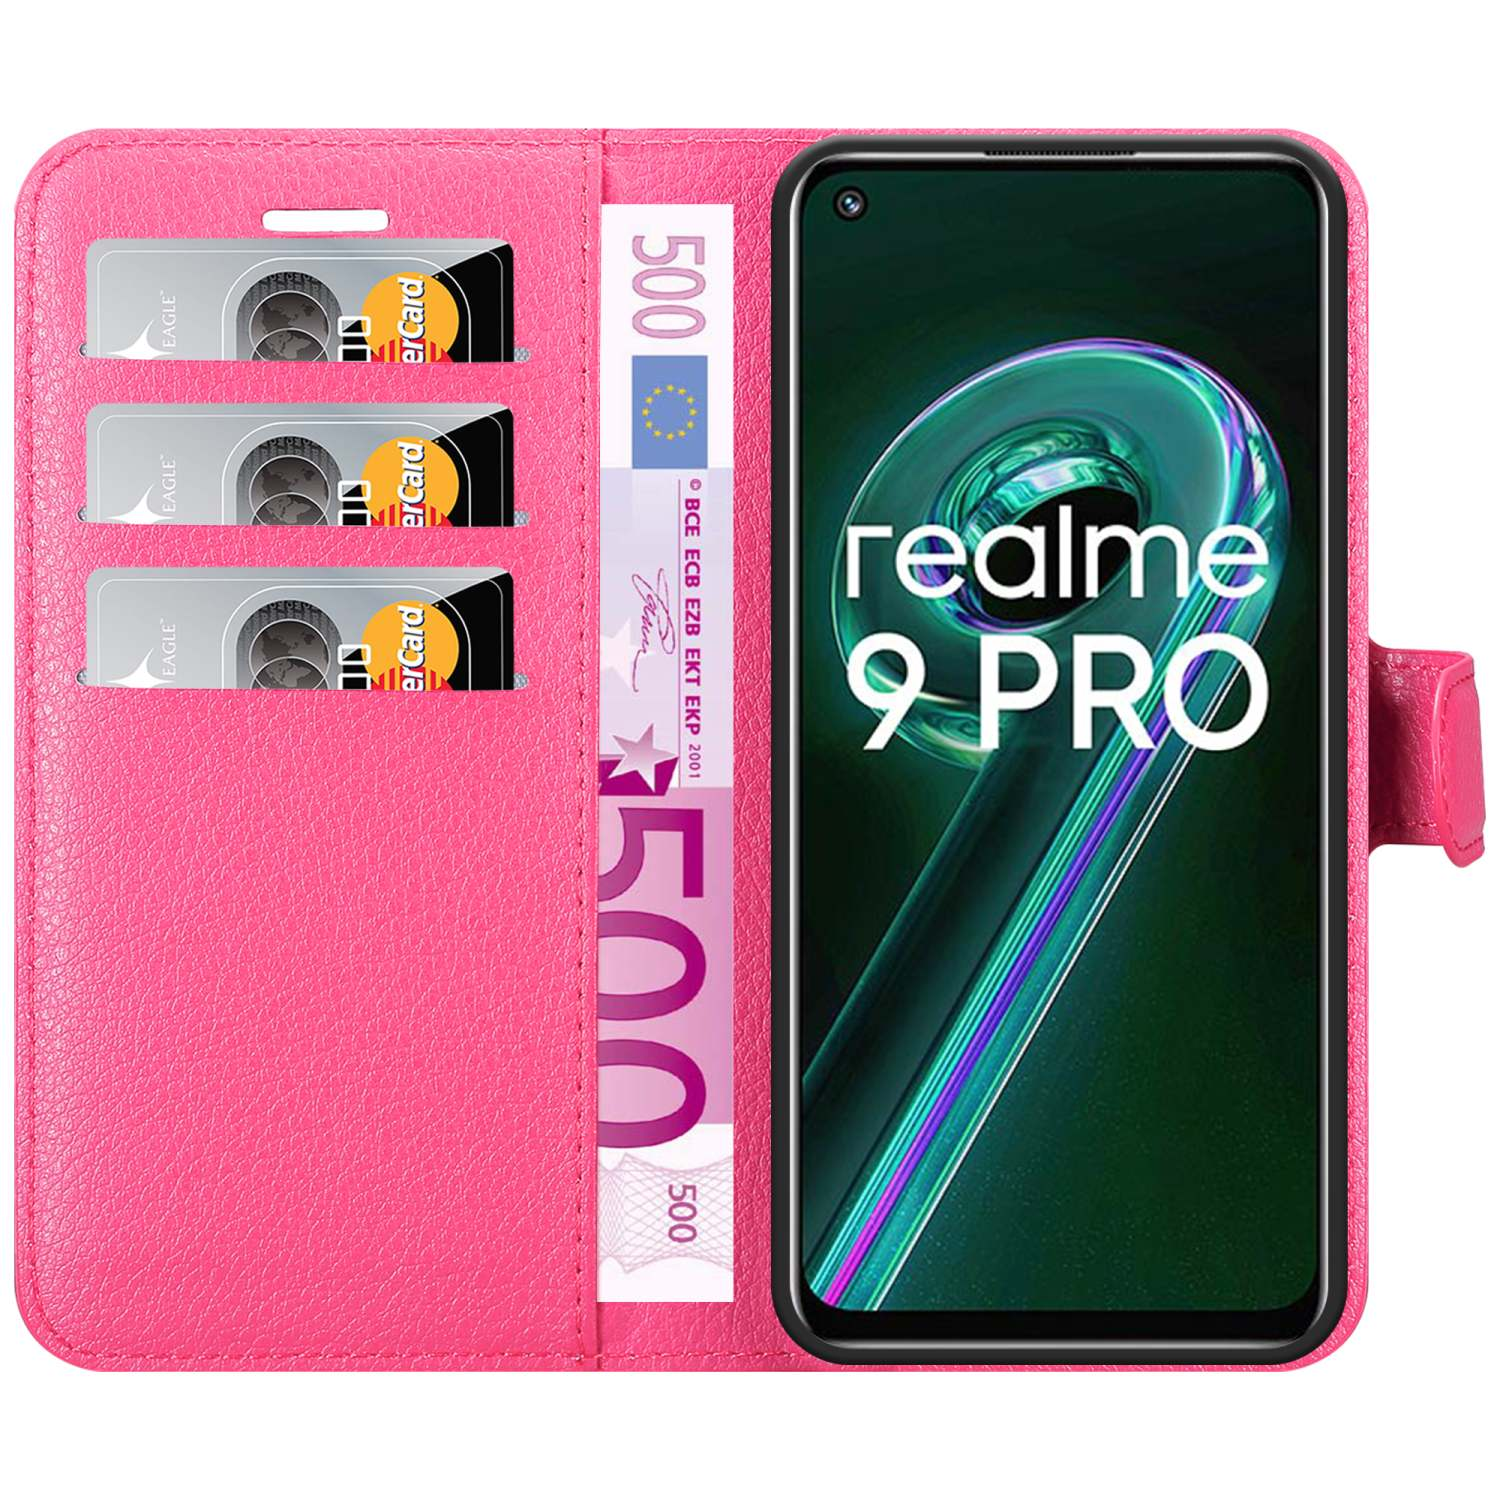 / 9 / OnePlus 9 LITE 5G, CADORABO CHERRY PINK V25 / Nord / 2 Bookcover, CE Realme, Standfunktion, PRO 5G Q5 Hülle Book